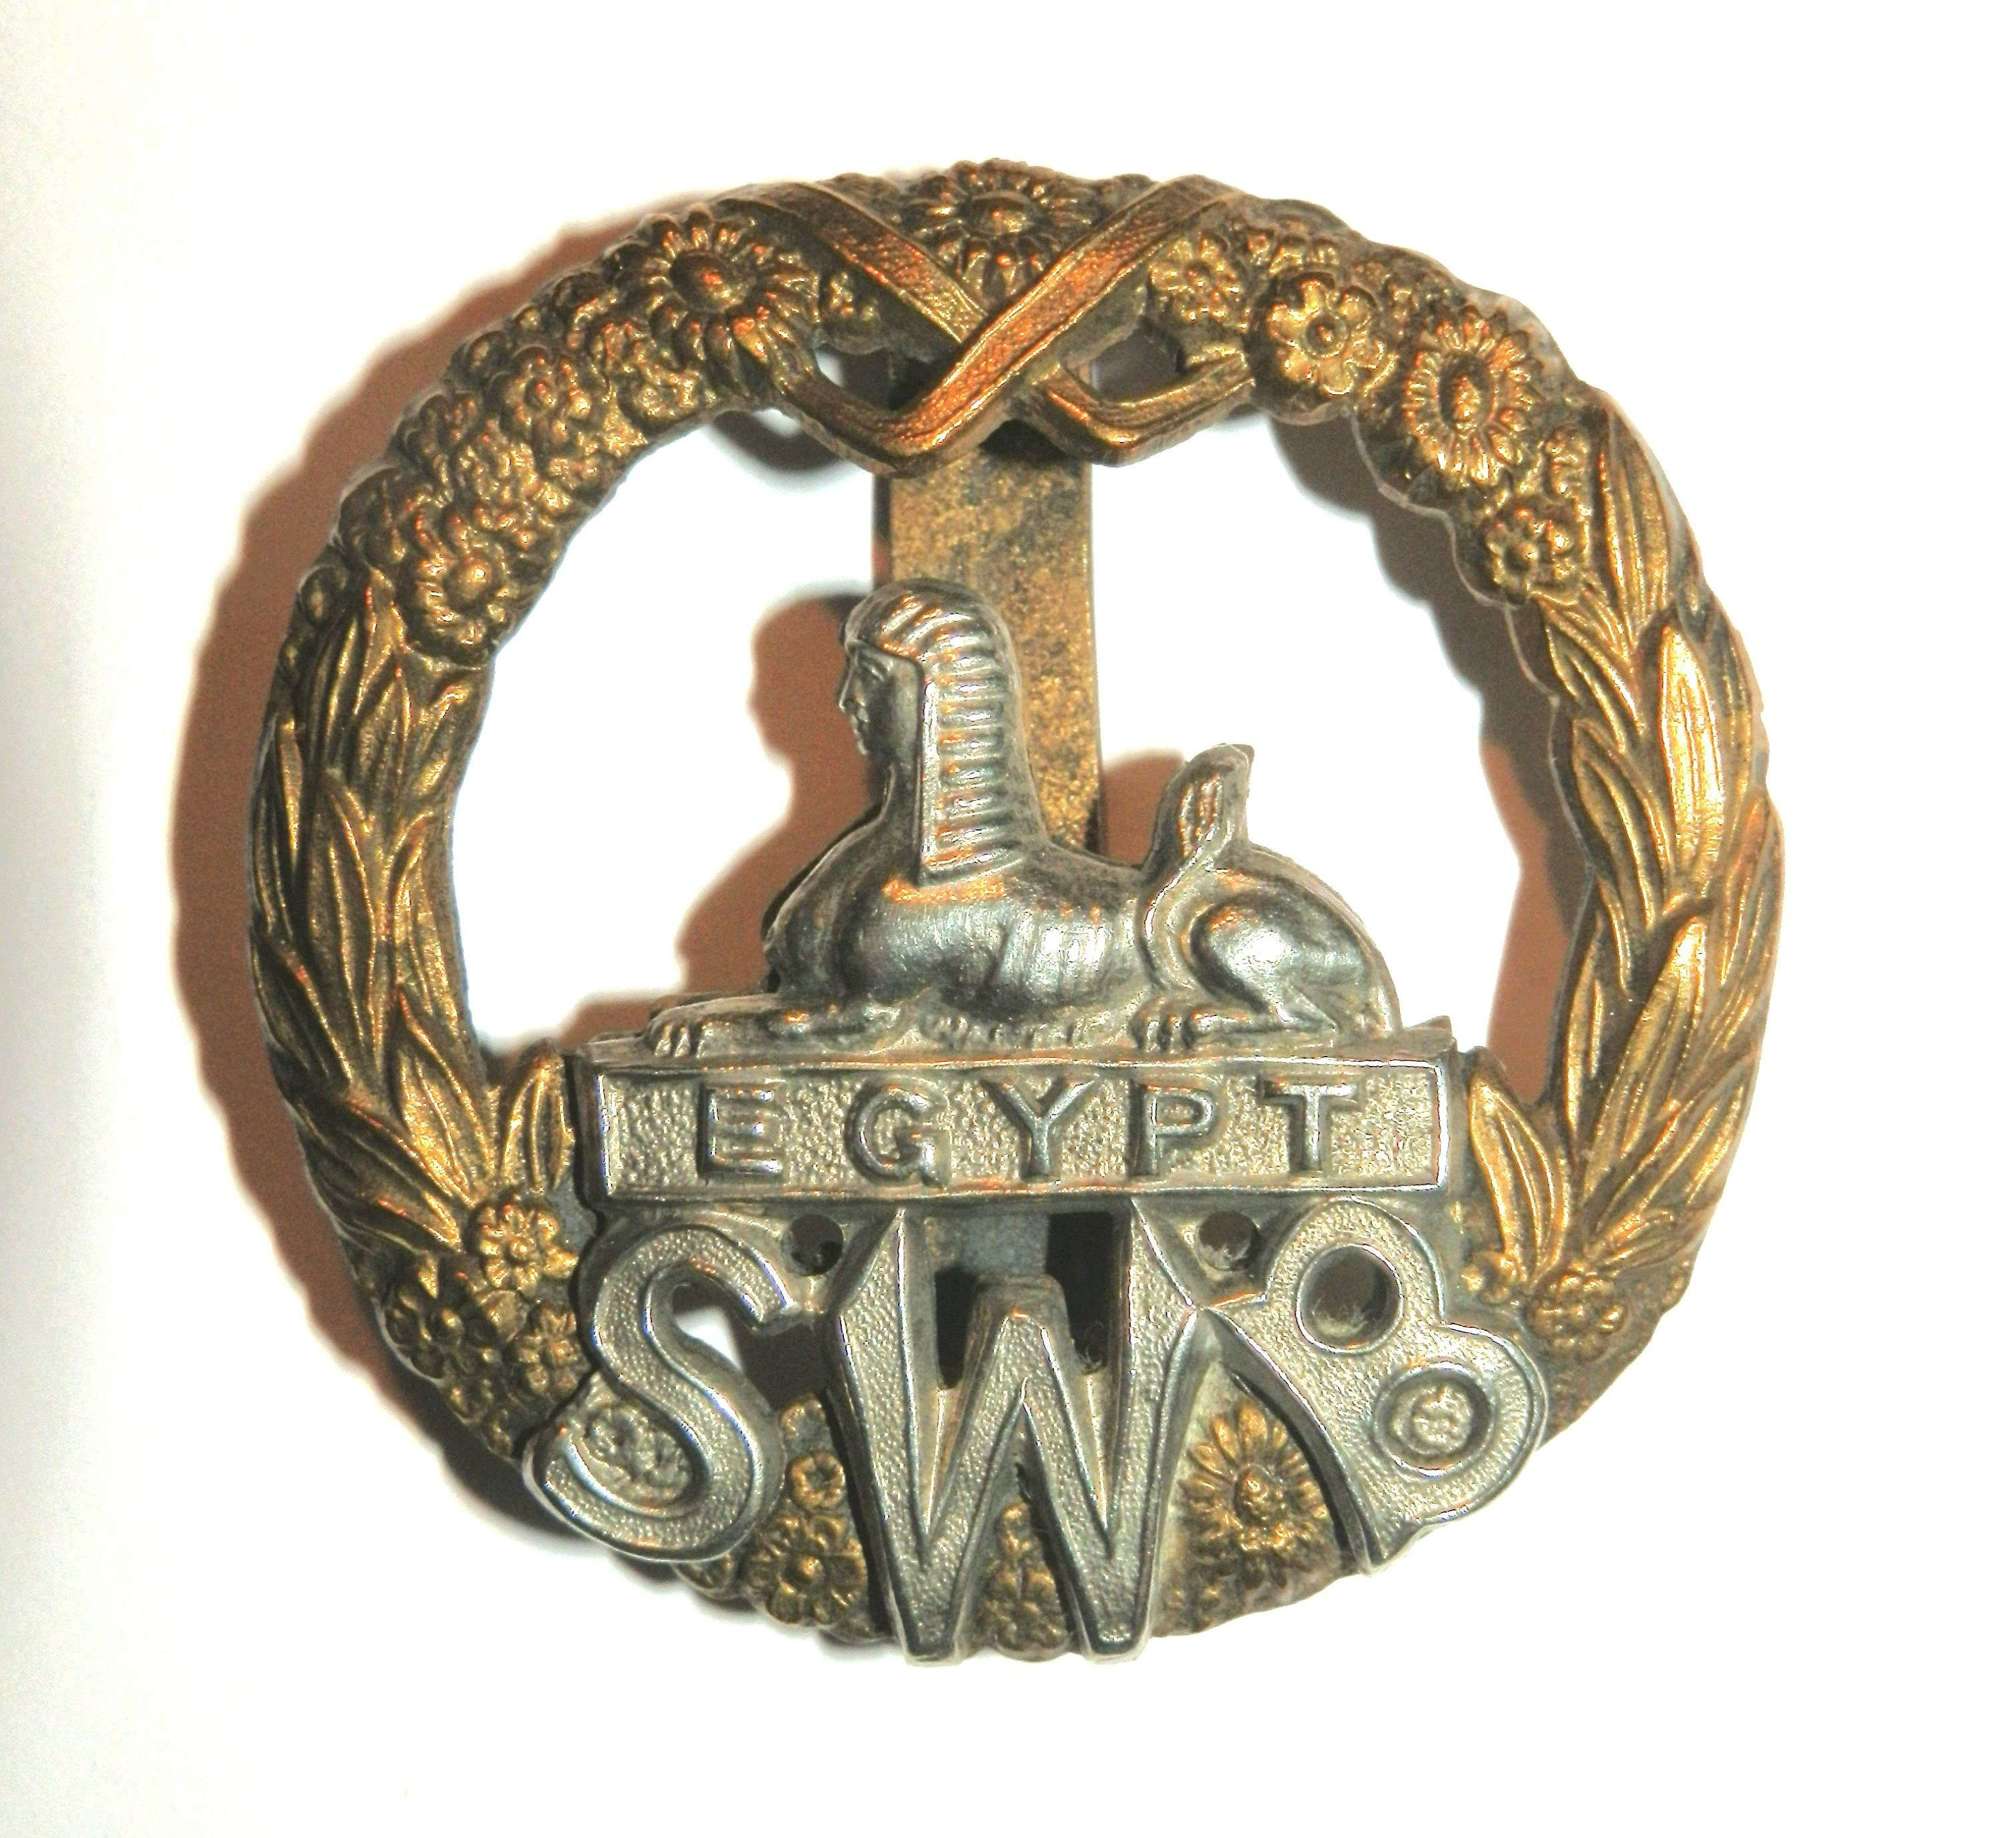 The South Wales Borderers Cap Badge.